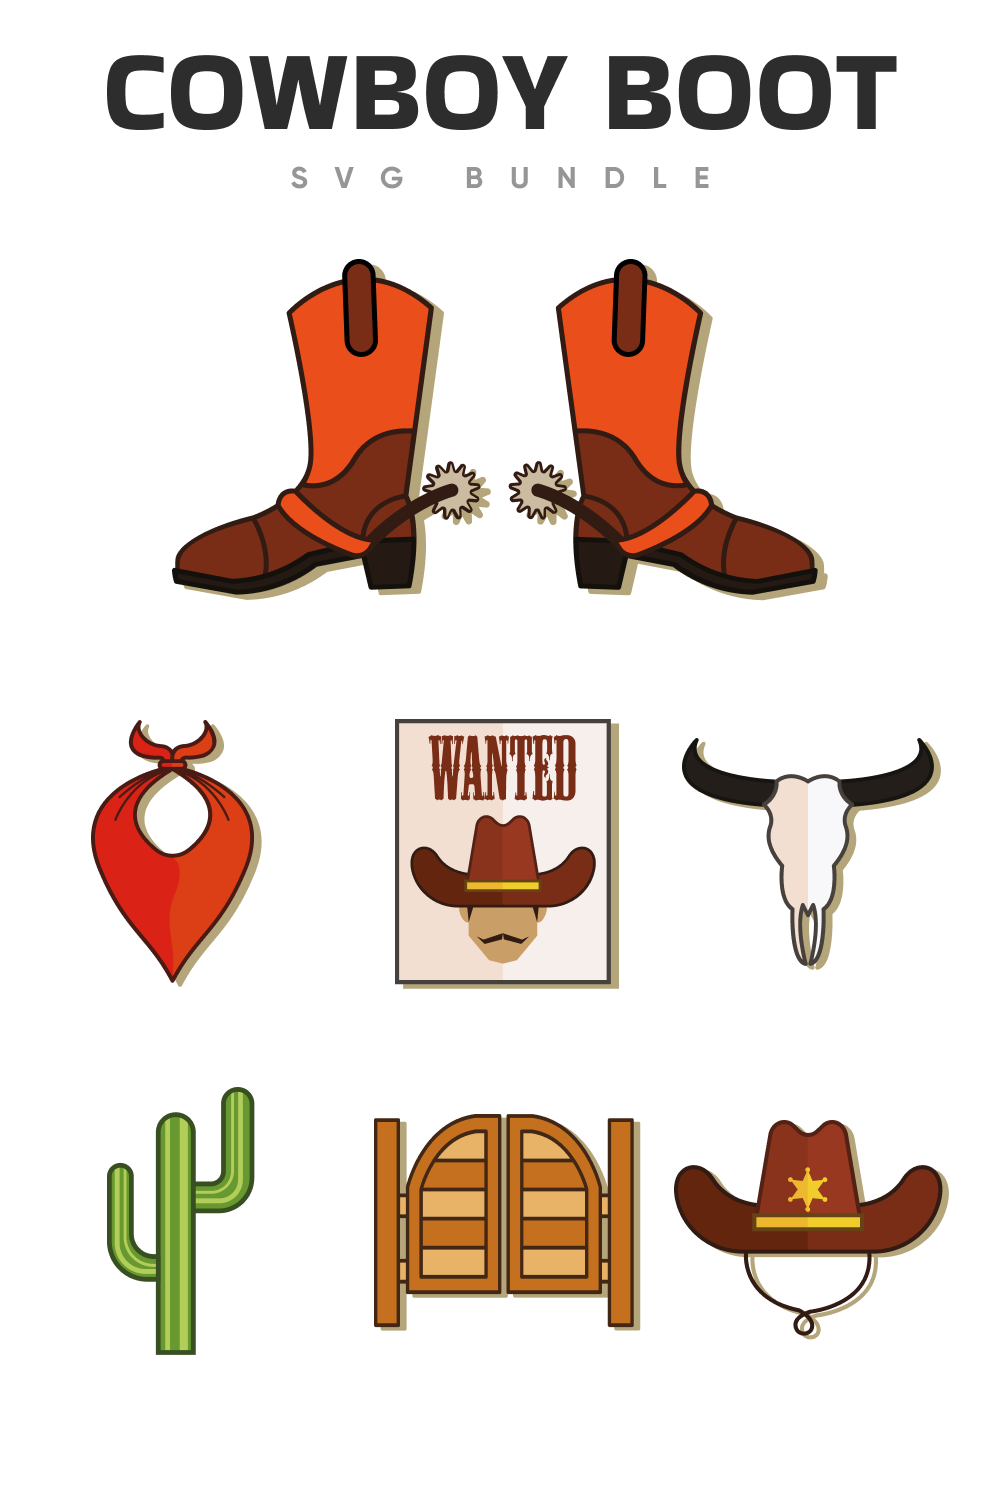 Diverse of the cowboys boots and other elements.